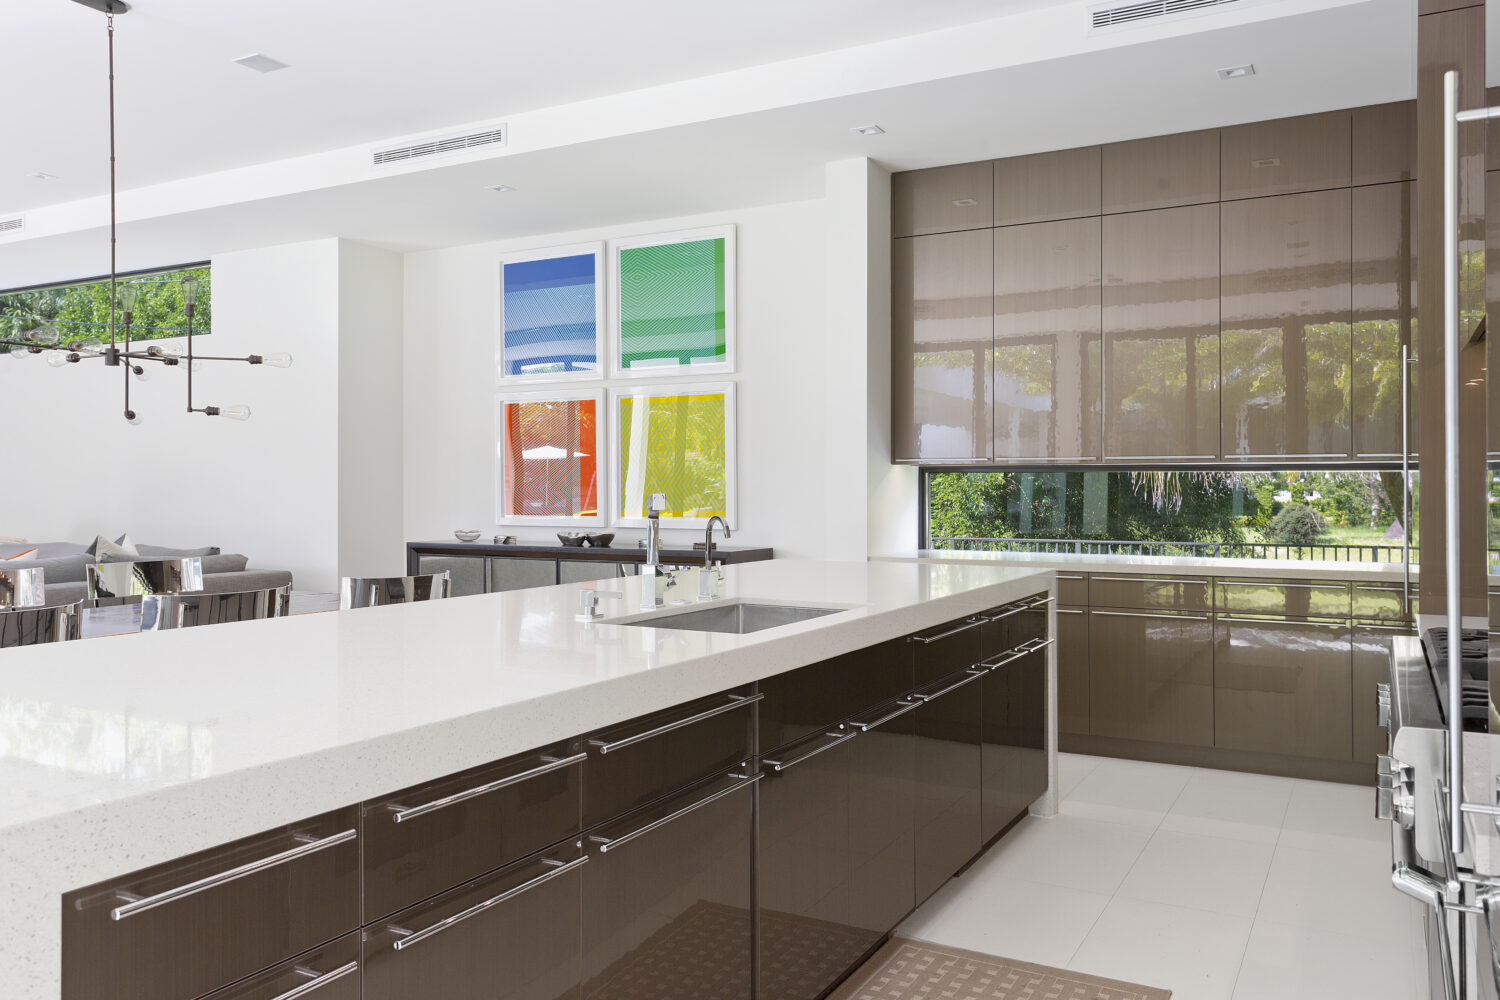 Contemporary Dura Supreme kitchen design by Danny McMullen of Distinguished Kitchens and Baths.